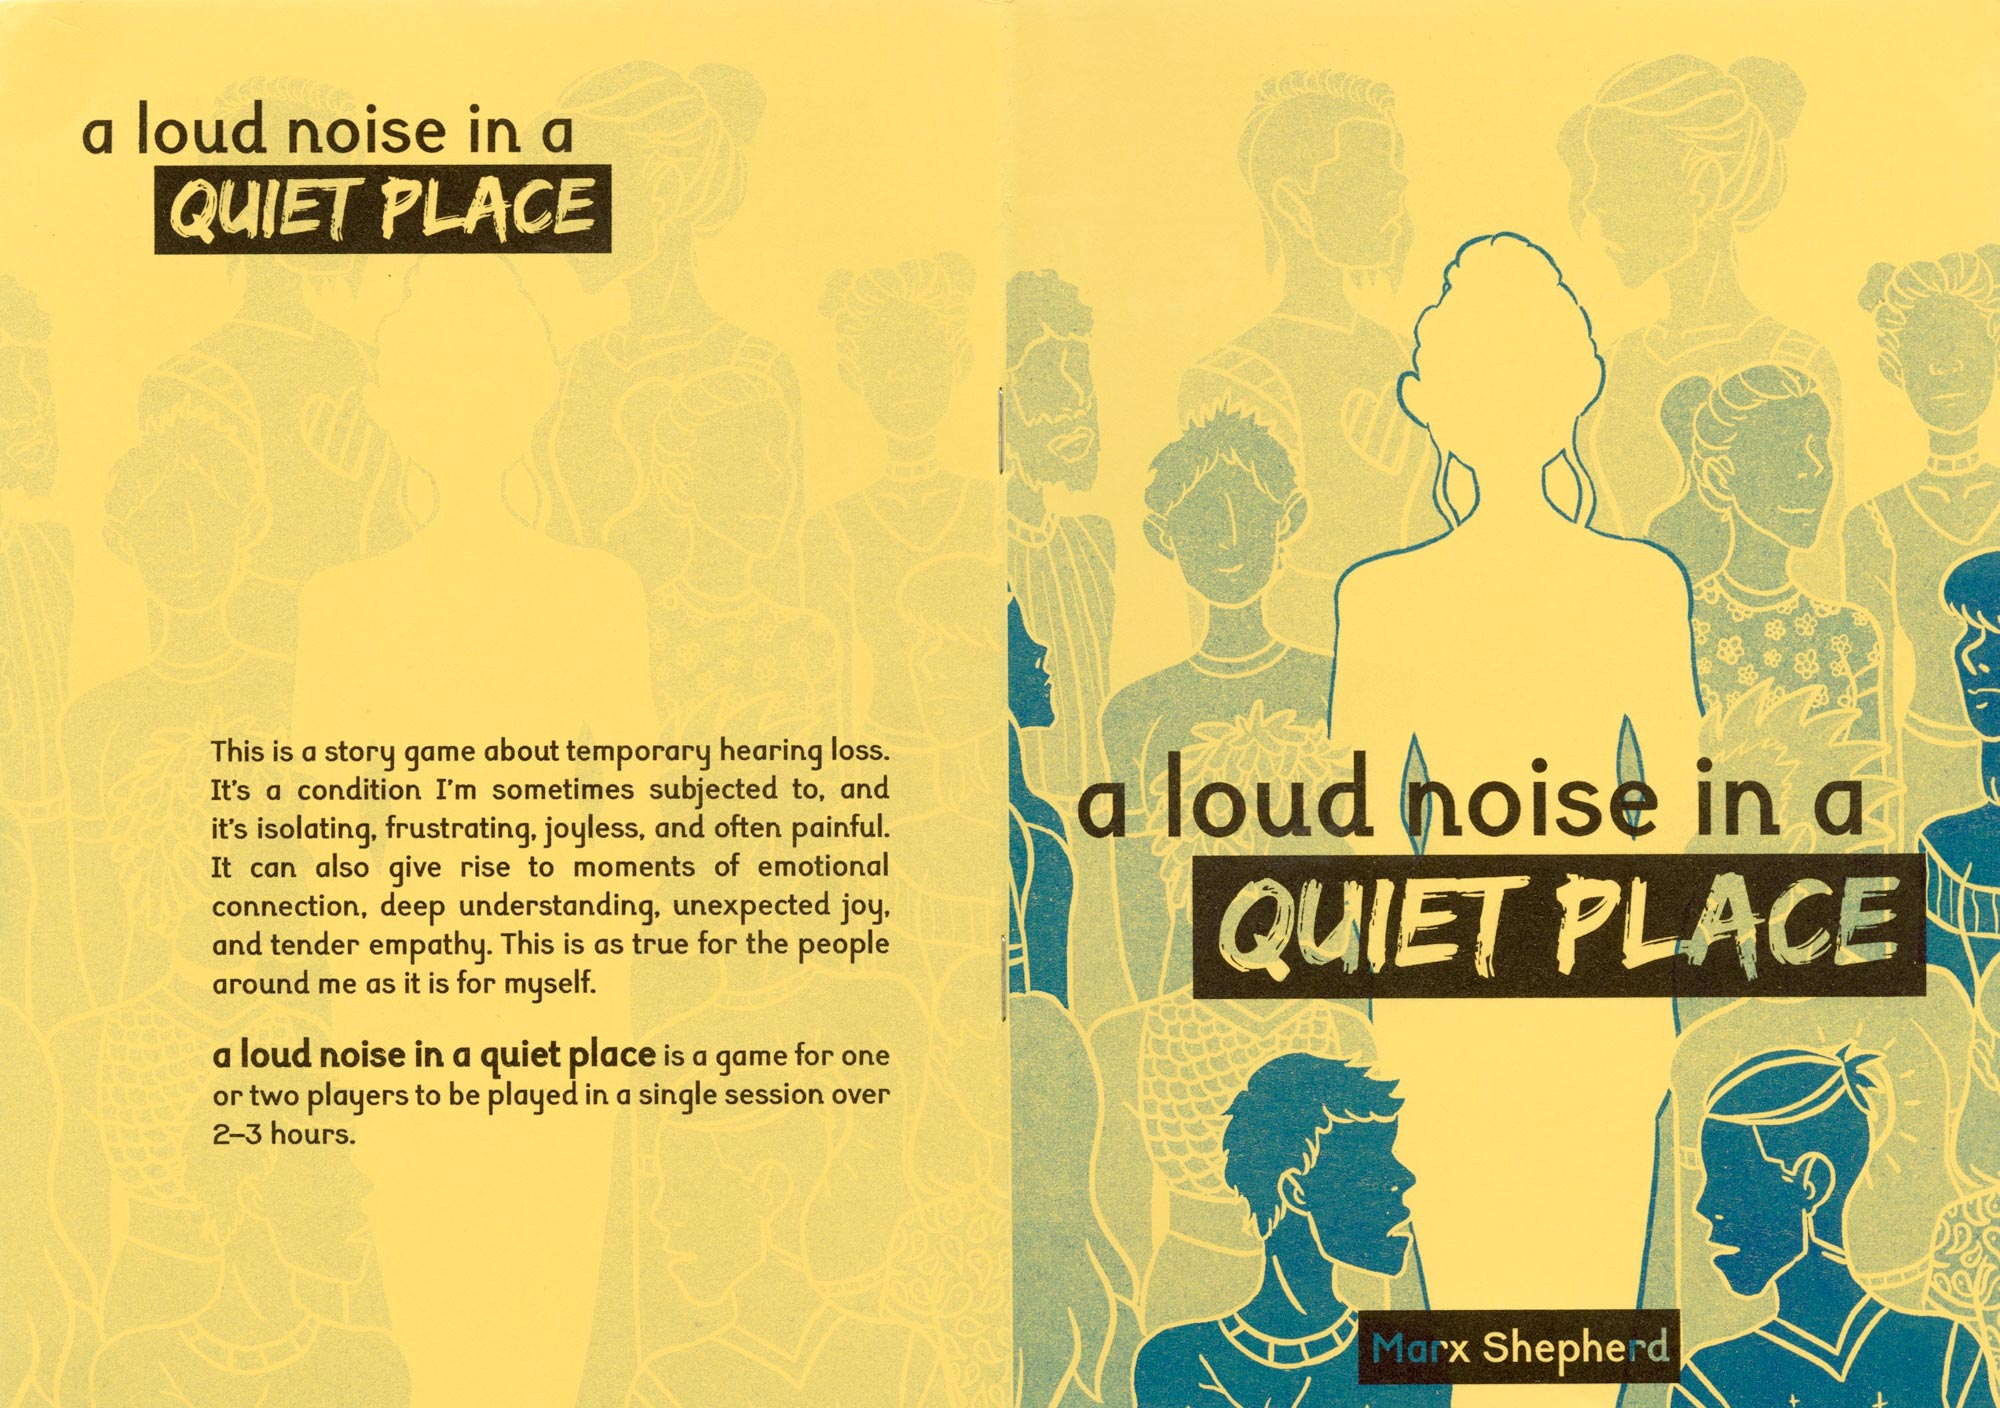 Back cover and front cover, the front cover has green shaded people on the front and the title in large black letters. The back cover has 2 body text paragraphs towards the bottom